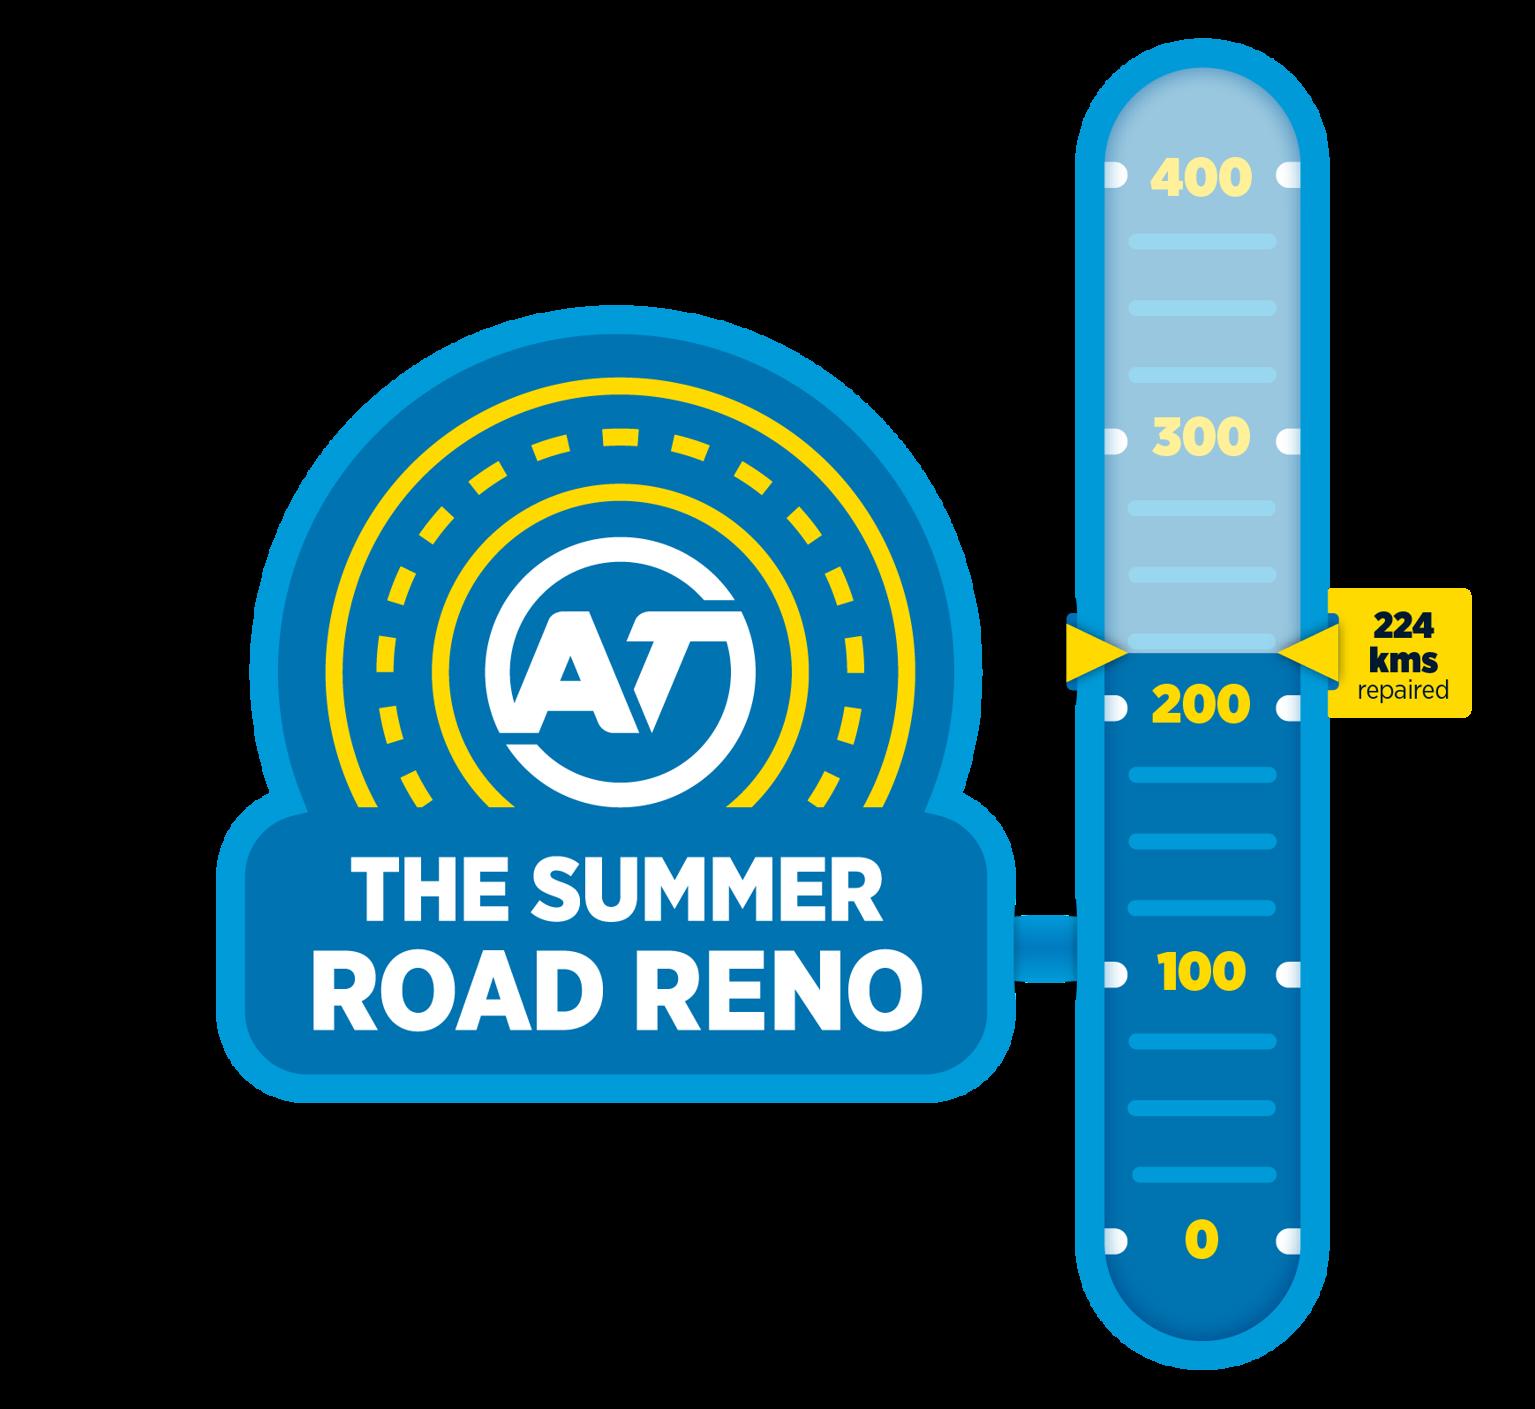 Summer road reno 'renometer' showing progress made so far. 224km of roads have been repaired. 